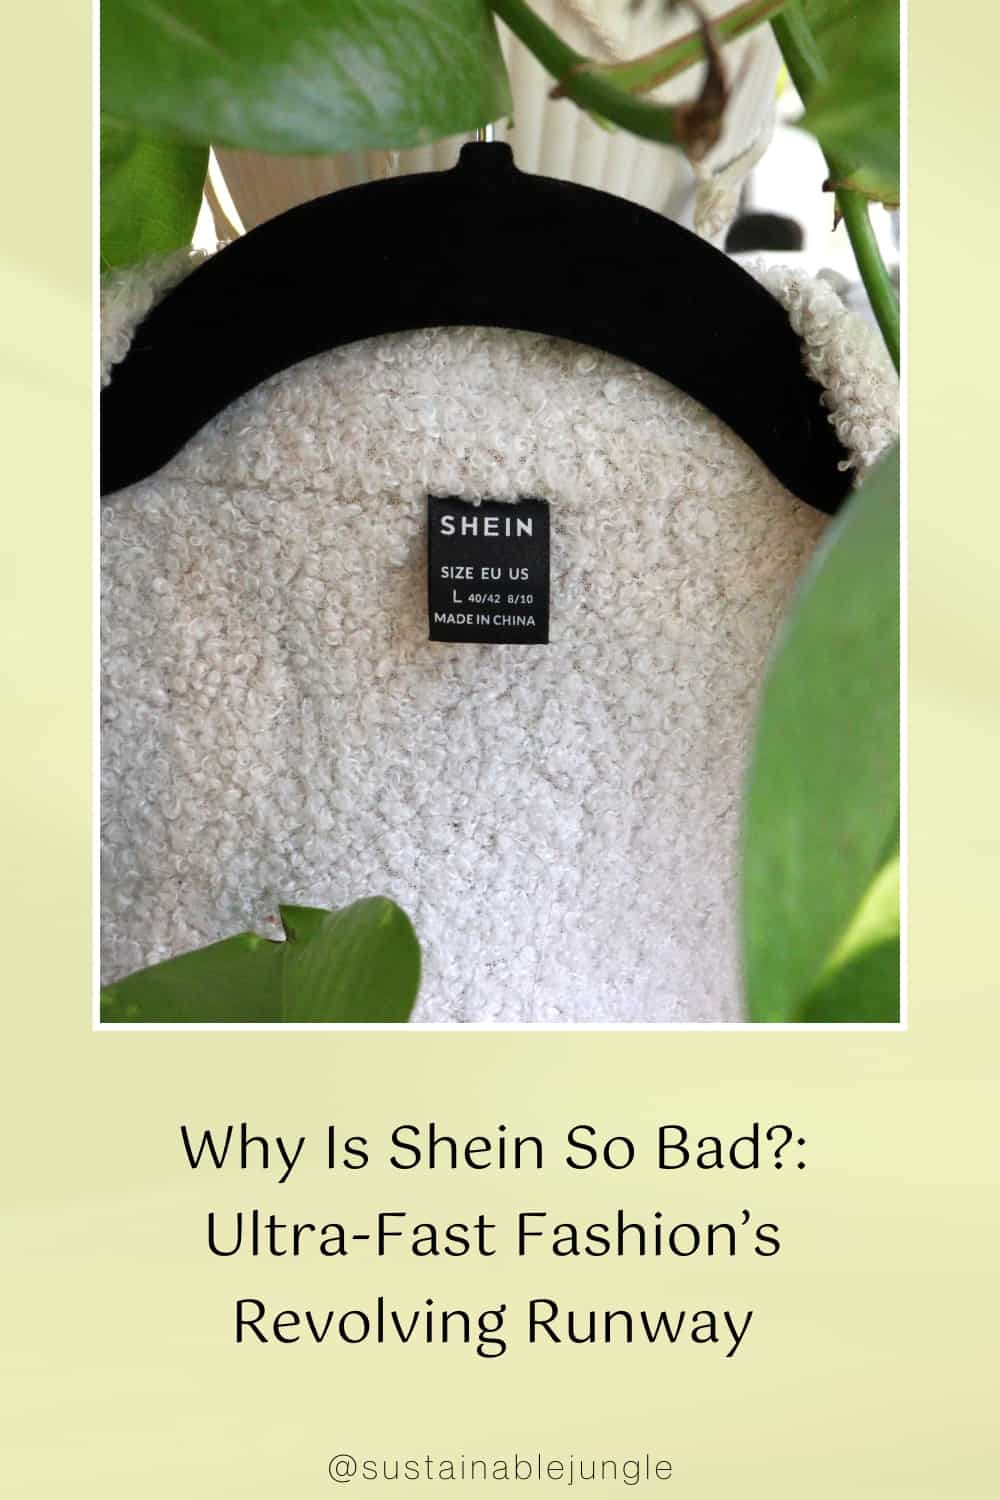 Why Is Shein So Bad?: Ultra-Fast Fashion’s Revolving Runway Image by Sustainable Jungle #whyissheinsobad #issheinethical #shein ethical issues #shein sustainability #issheinbad #howbadishein #sustainablejungle